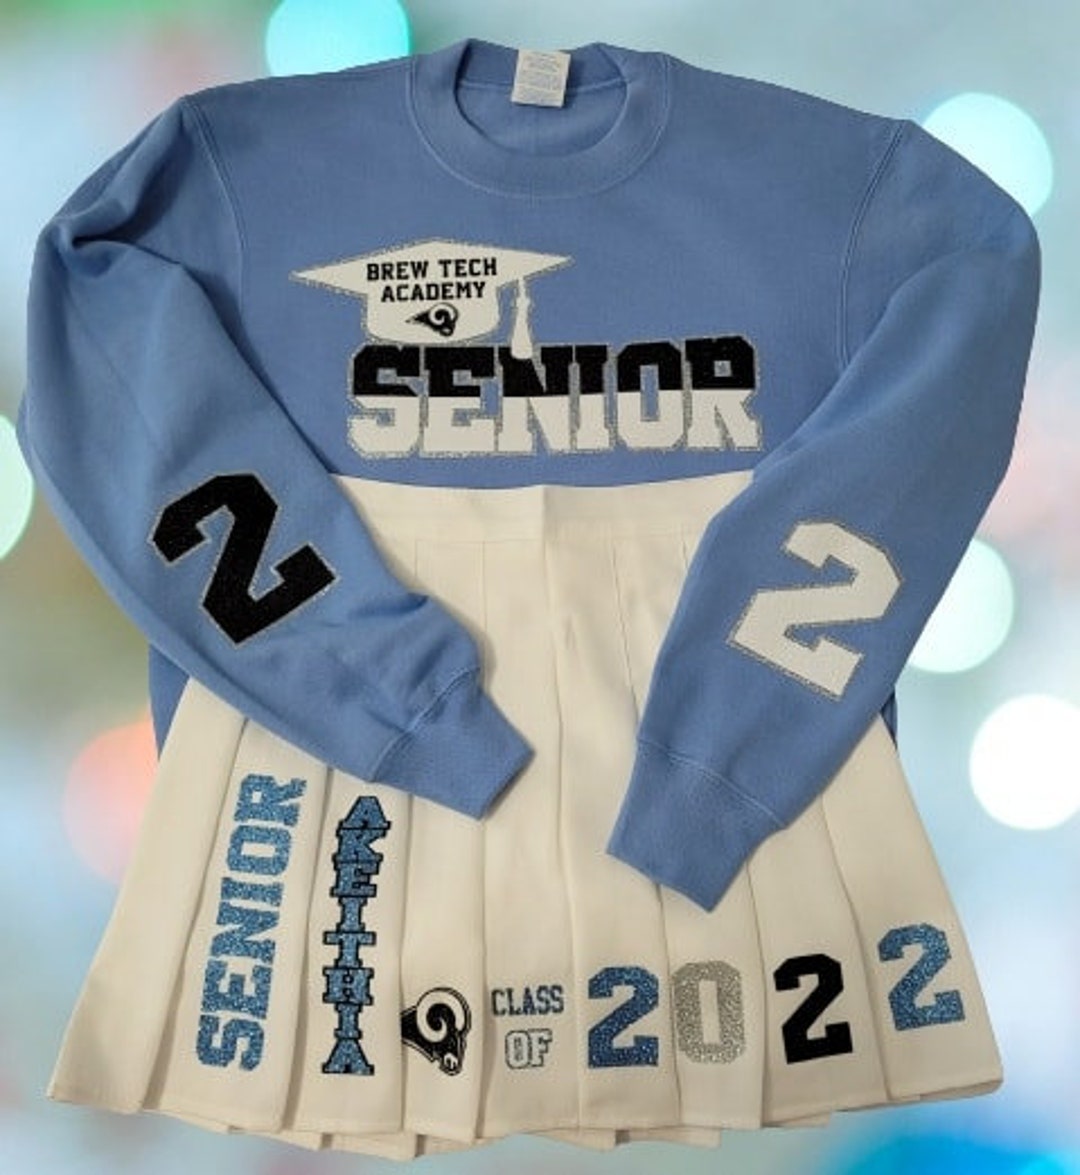 Seniors Sweatshirt and Skirt Sold Separately Add Each Item to - Etsy